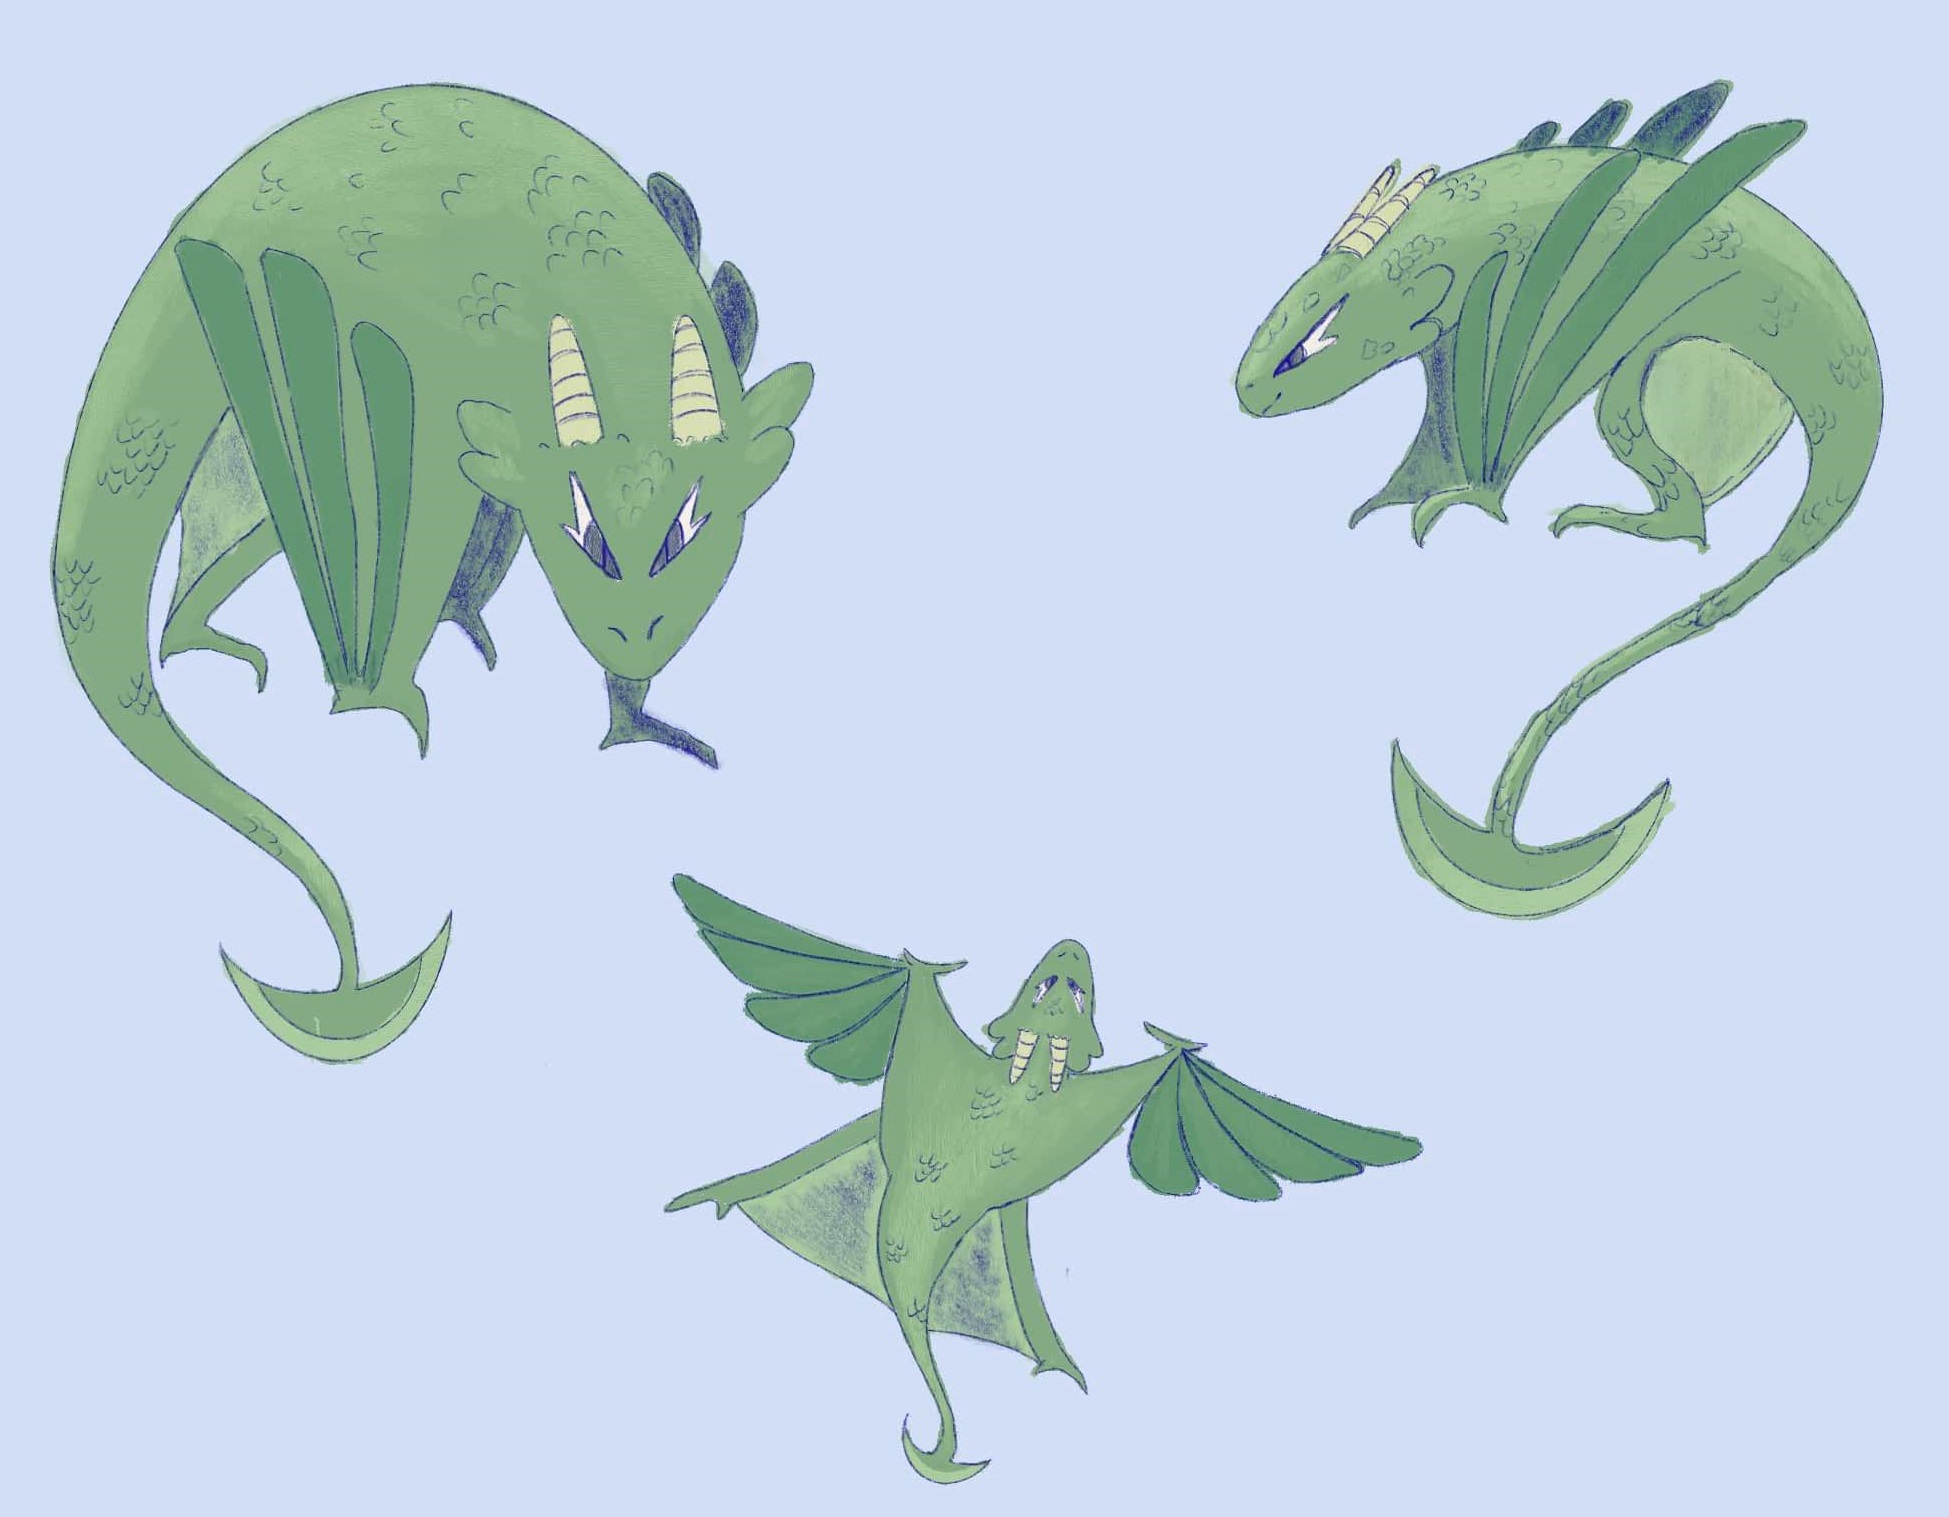 Three drawings of the same dragon design, The dragon is green, has small horns, feather like wings, and an axe-like tail